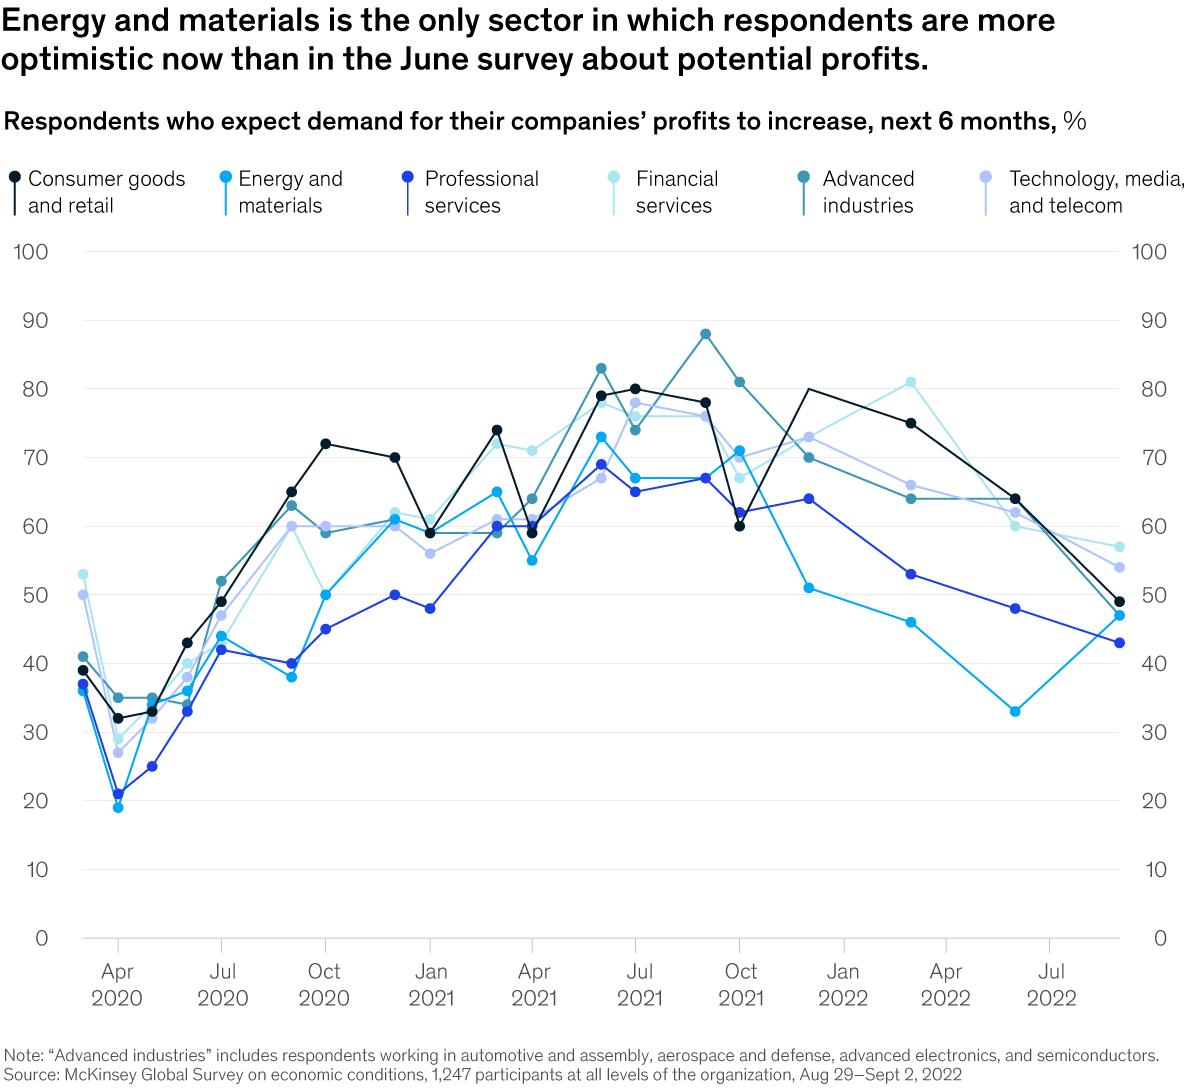 Chart detailing energy and materials as being the only sector in which respondents are more optimistic now than in the June survey about potential profits